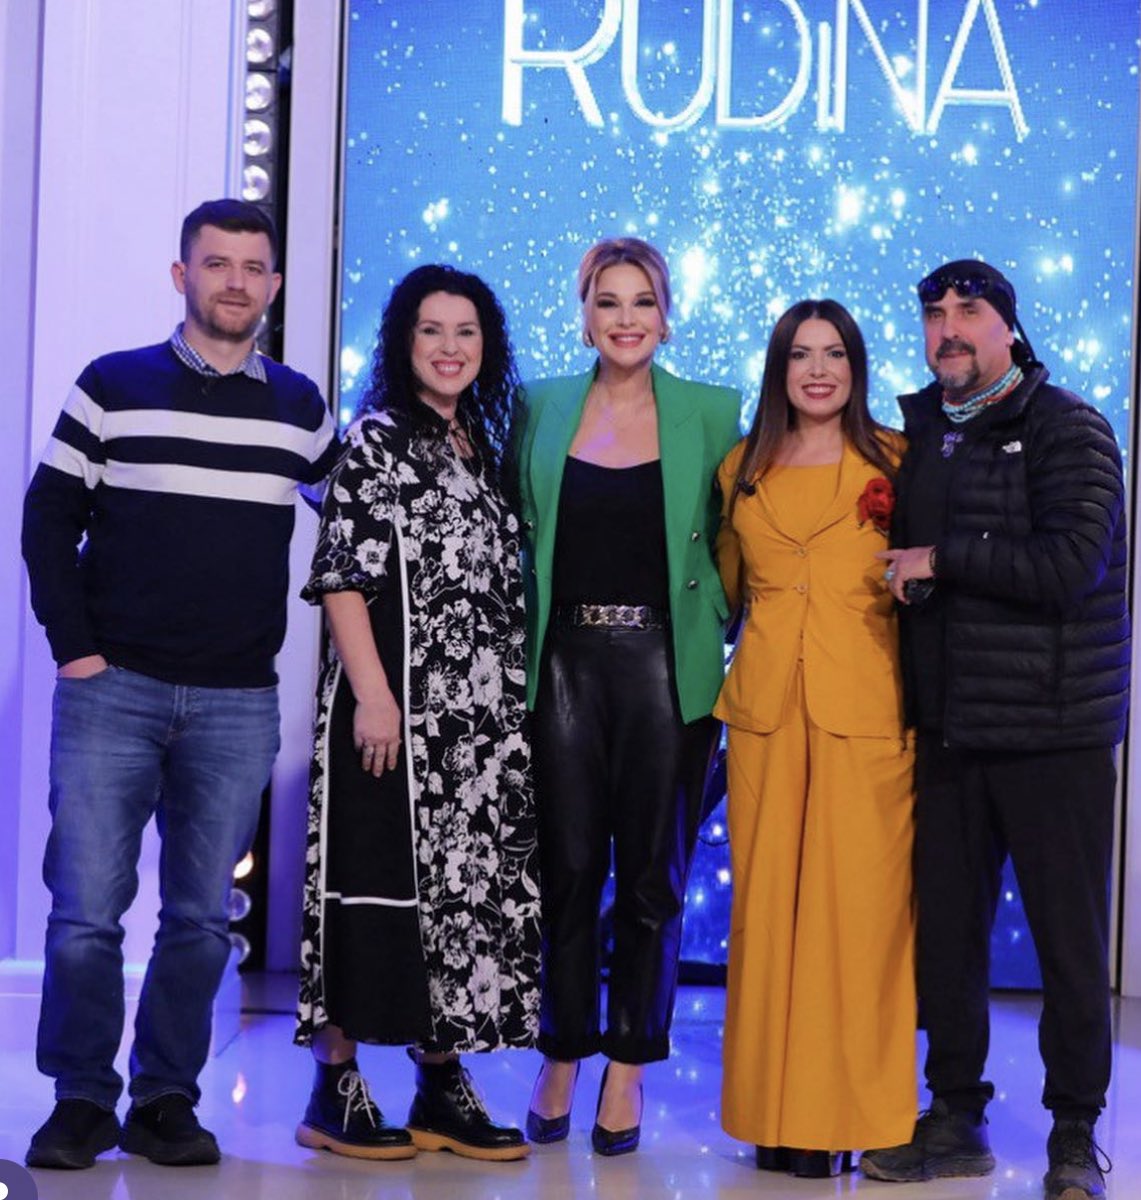 Such a peasure being part of a panel of friends and professionals to talk about the beauty of travel and exploration in Albania 🎥🙌 on Klan Tv @Rudina. Grateful also for the opportunity to promote the Tourism and Travel Show Albania 🌍✈️ 31 Jan. 1 Feb by Iceberg Exhibitions